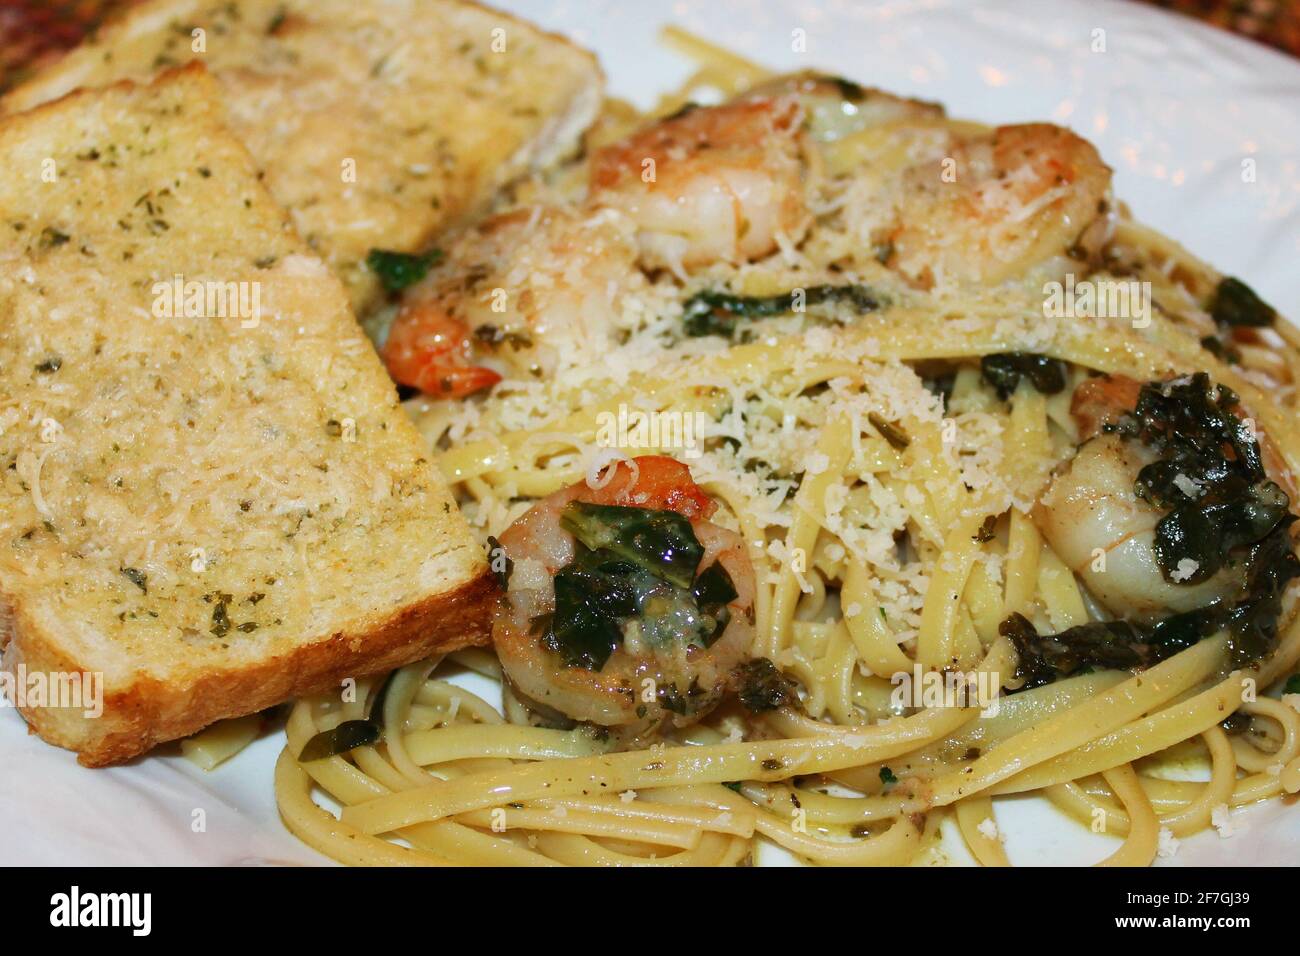 A close-up of a plate of shrimp scampi with garlic bread Stock Photo